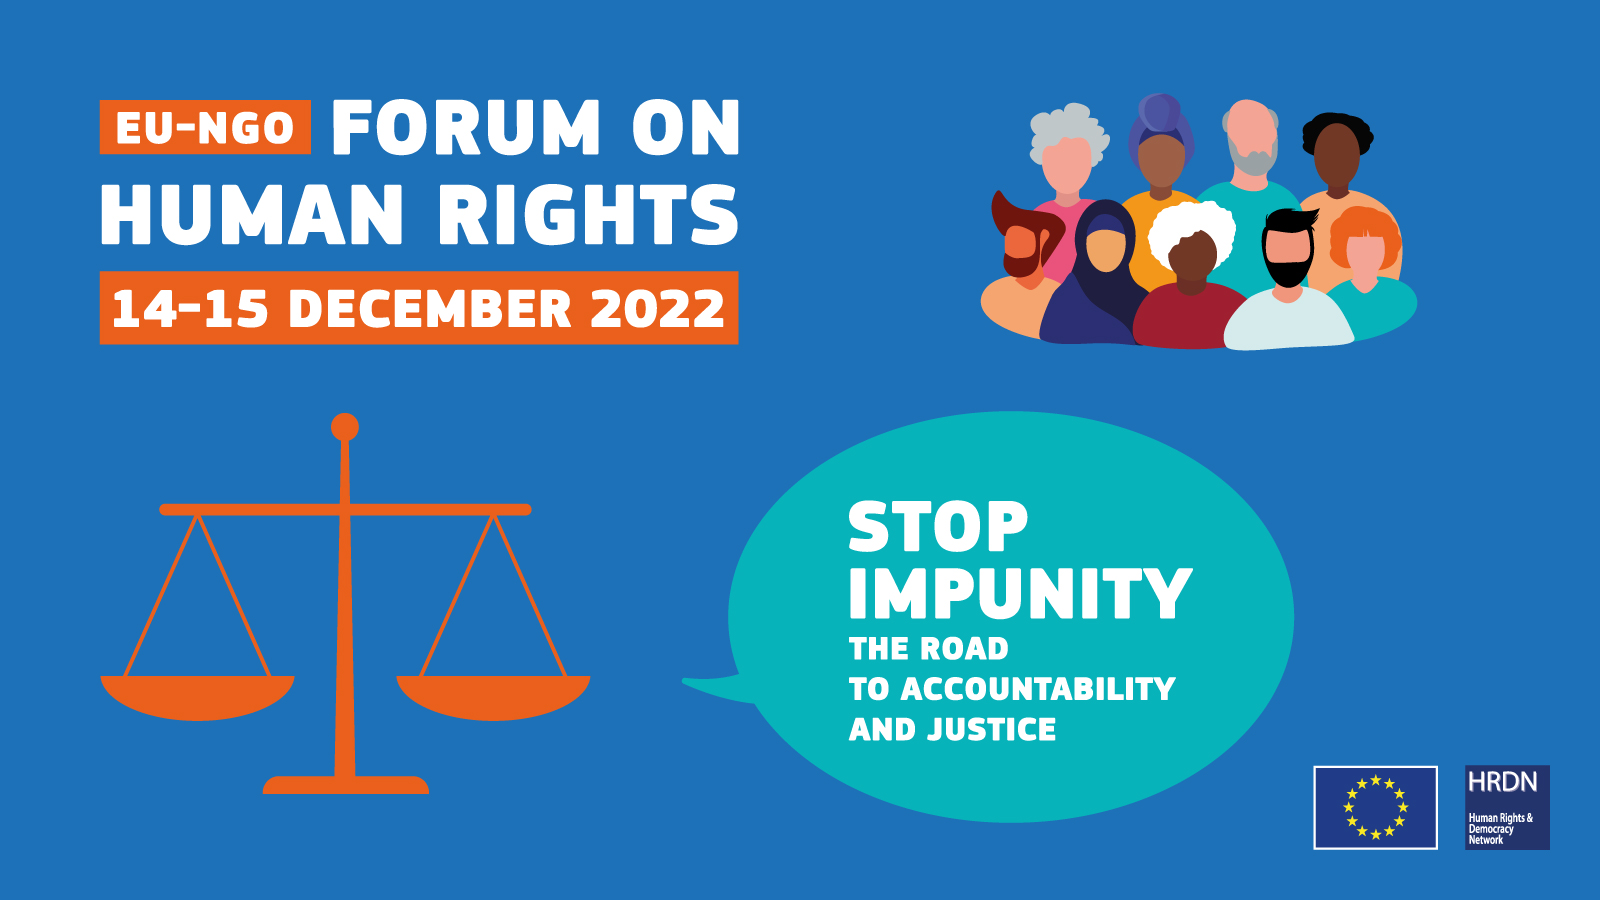 Join the live sessions from the EU-NGO Forum on Human Rights